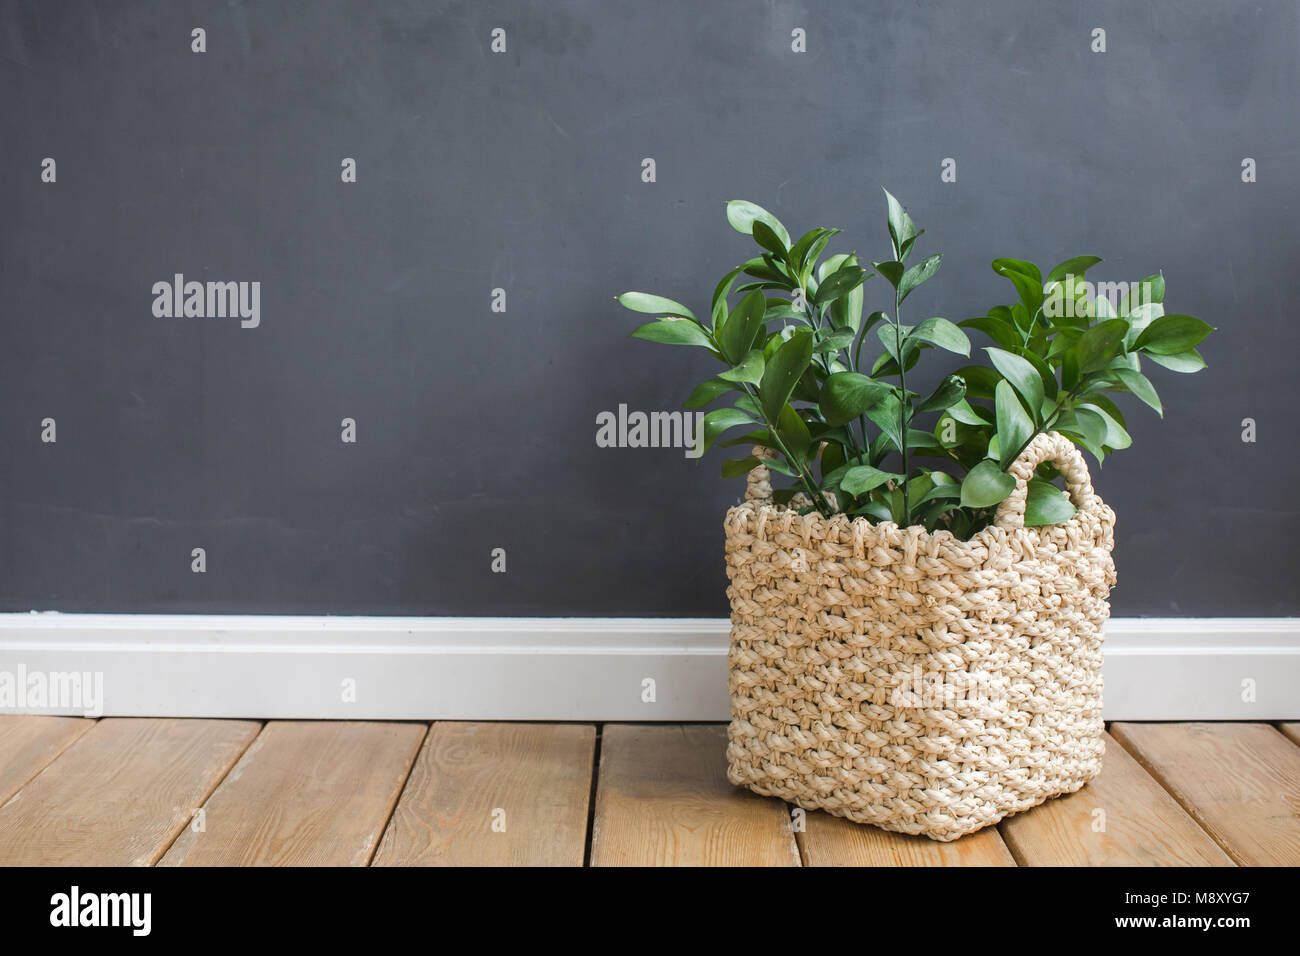 Plant tub against a gray wall on a wooden floor Stock Photo